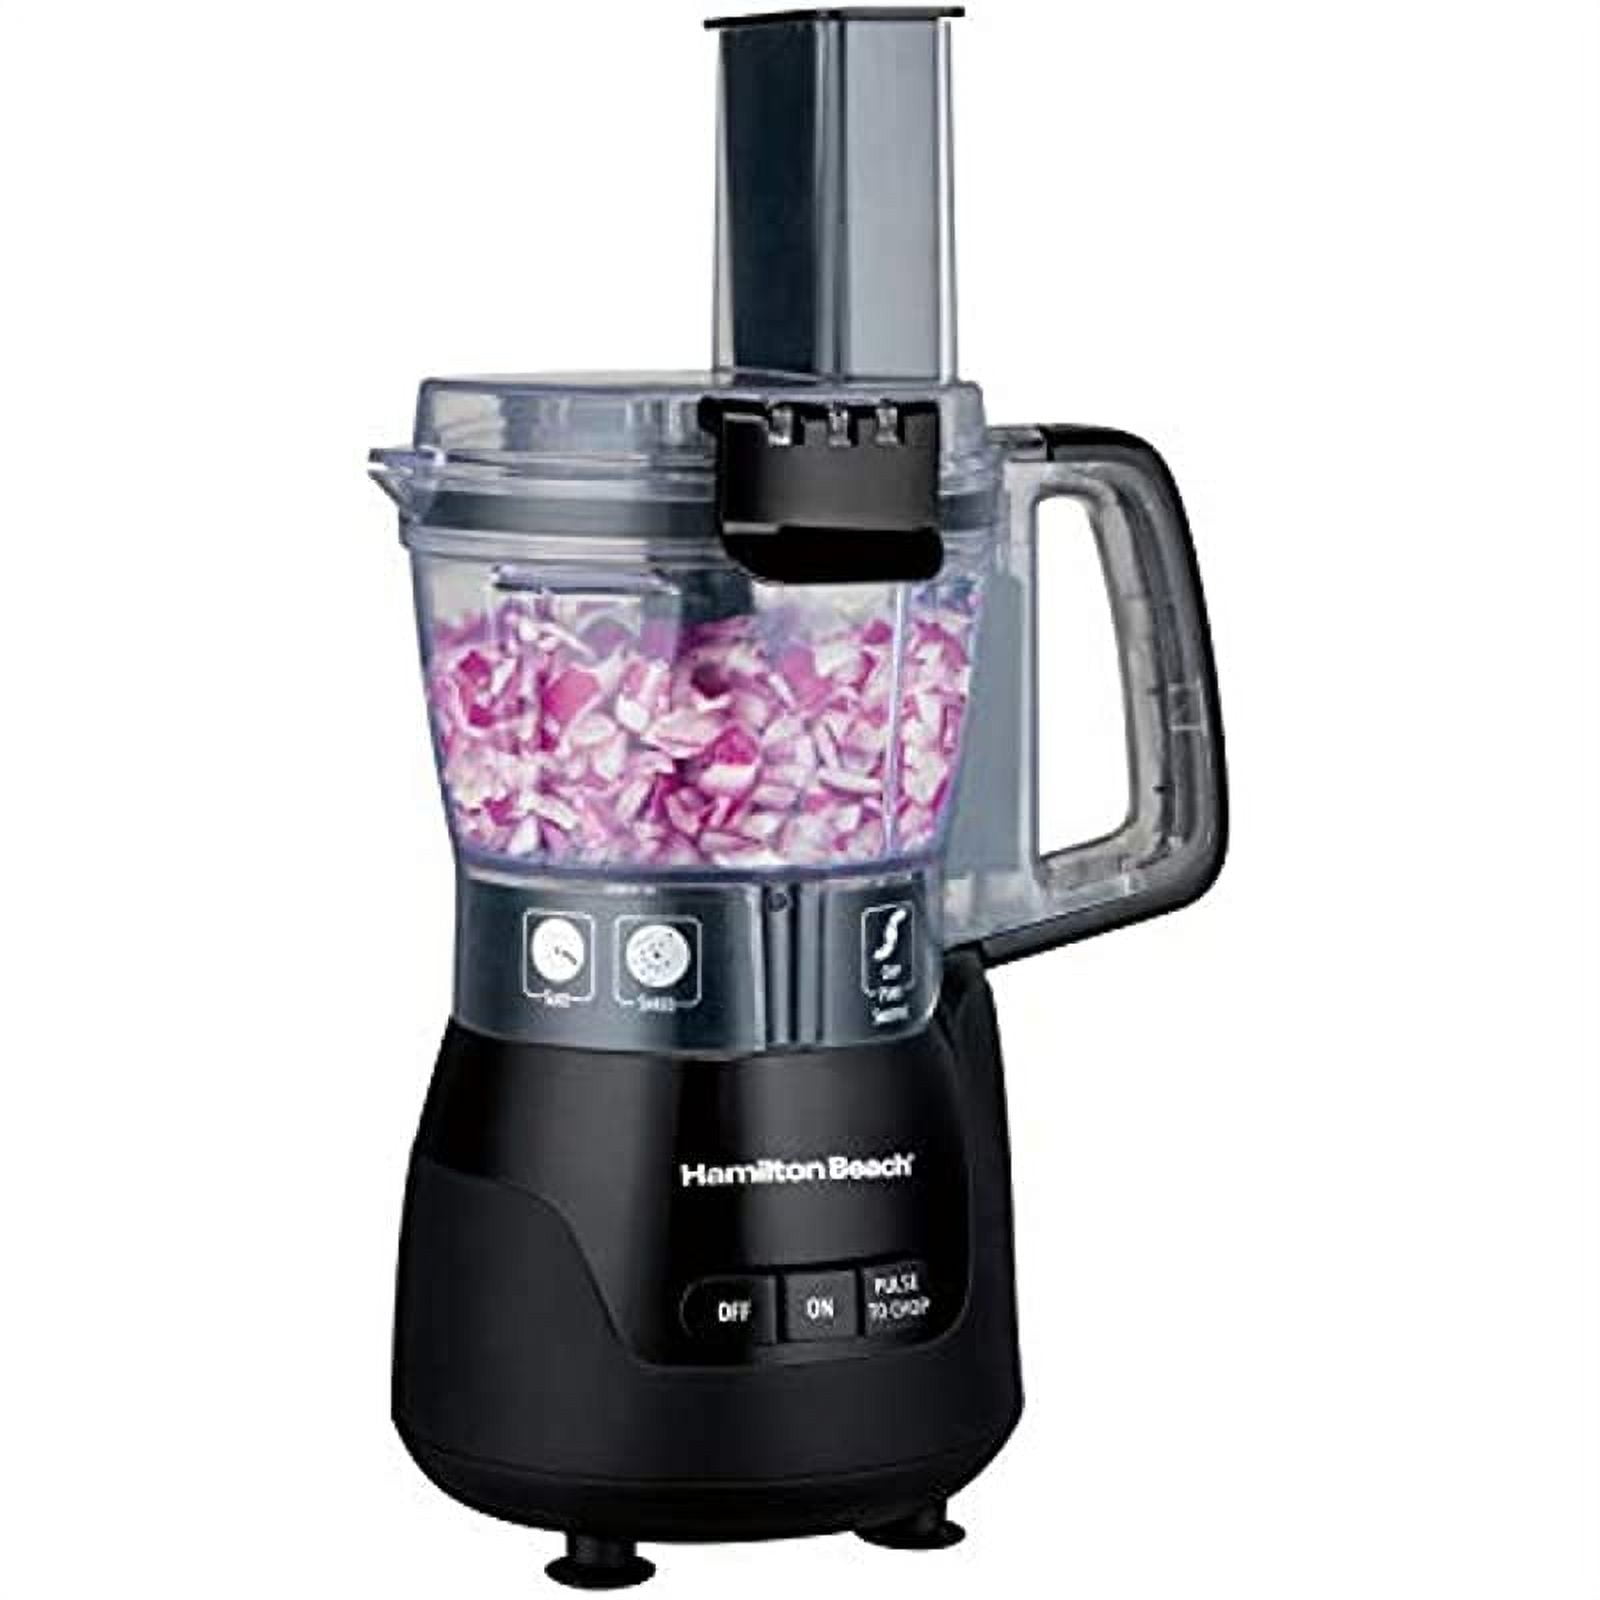  Cuisinart Mini Food Processor & Chopper, Small Stand Mixer for  Vegetables, Meats & More, 4 Cup, Electric, Black, RMC-100: Home & Kitchen